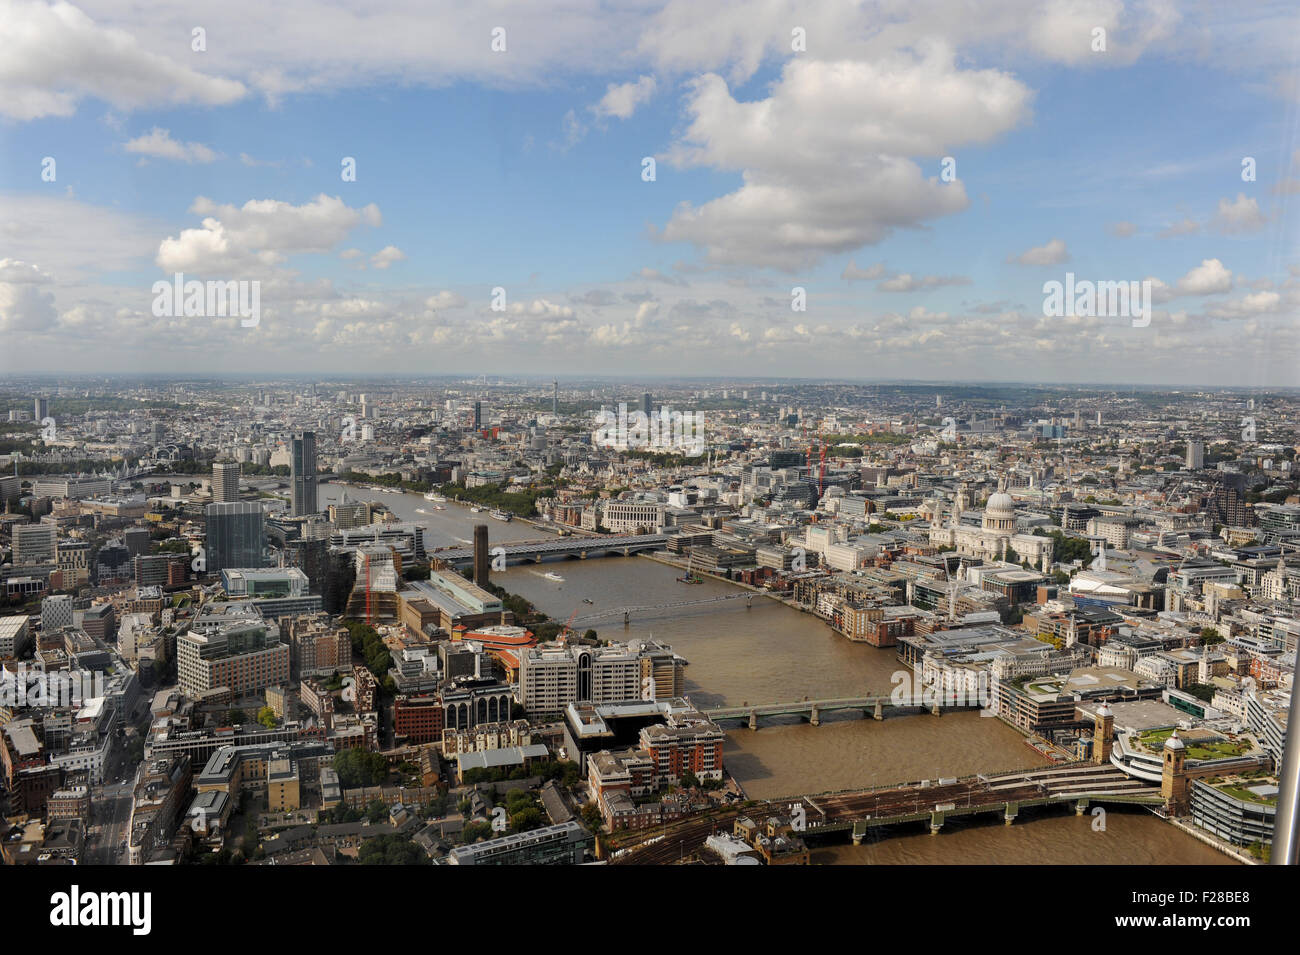 London UK - View looking north west across London from The Shard over the River Thames Stock Photo